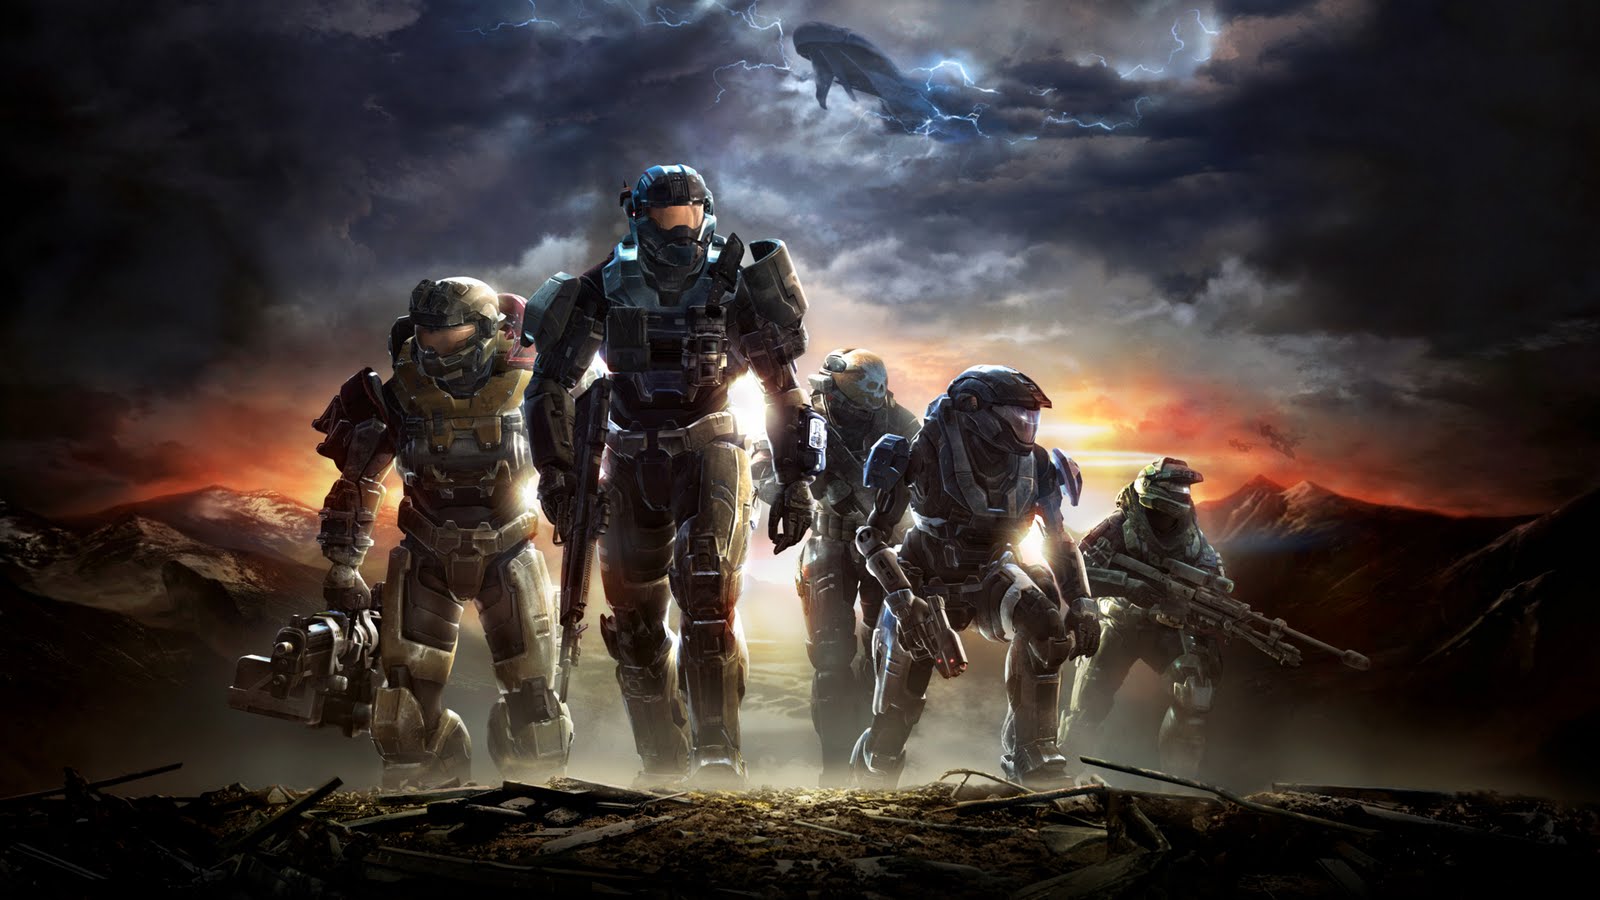 Halo Wallpaper 1080p Clickandseeworld Is All About Funny Amazing